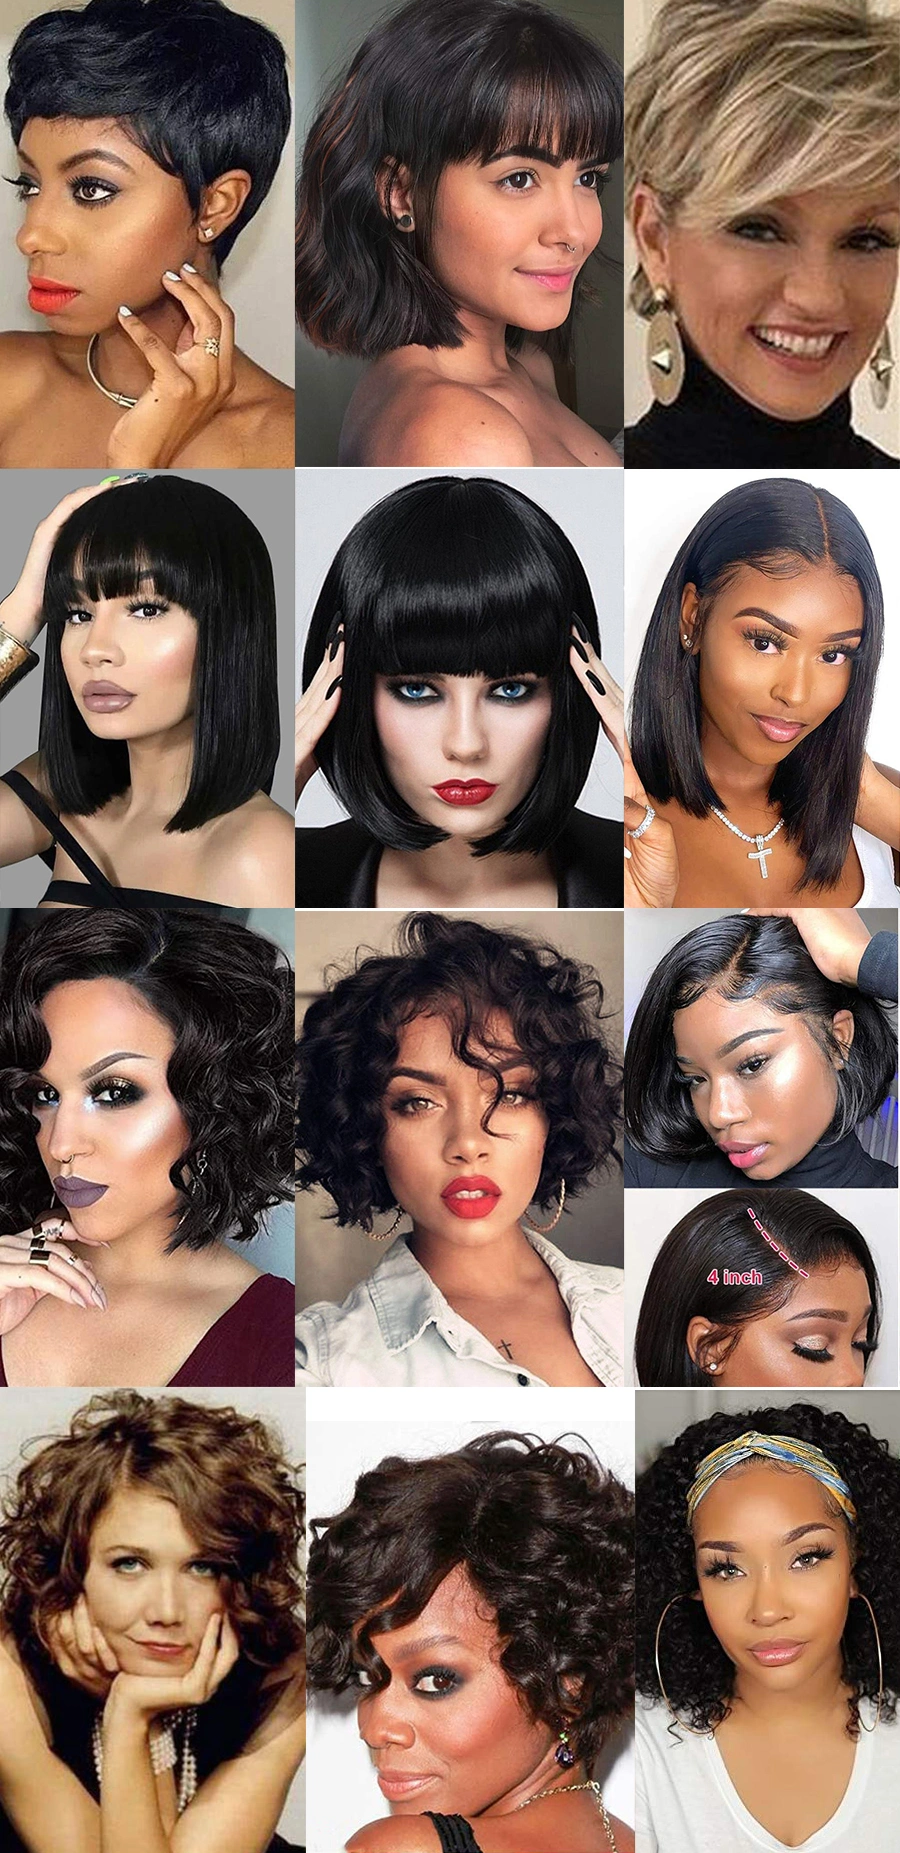 Angelbella Lace Front Human Hair Short Lace Wigs 150 Density Natural Black Brazilian Short Remy Hair Lace Front Wig for Women Human Hair